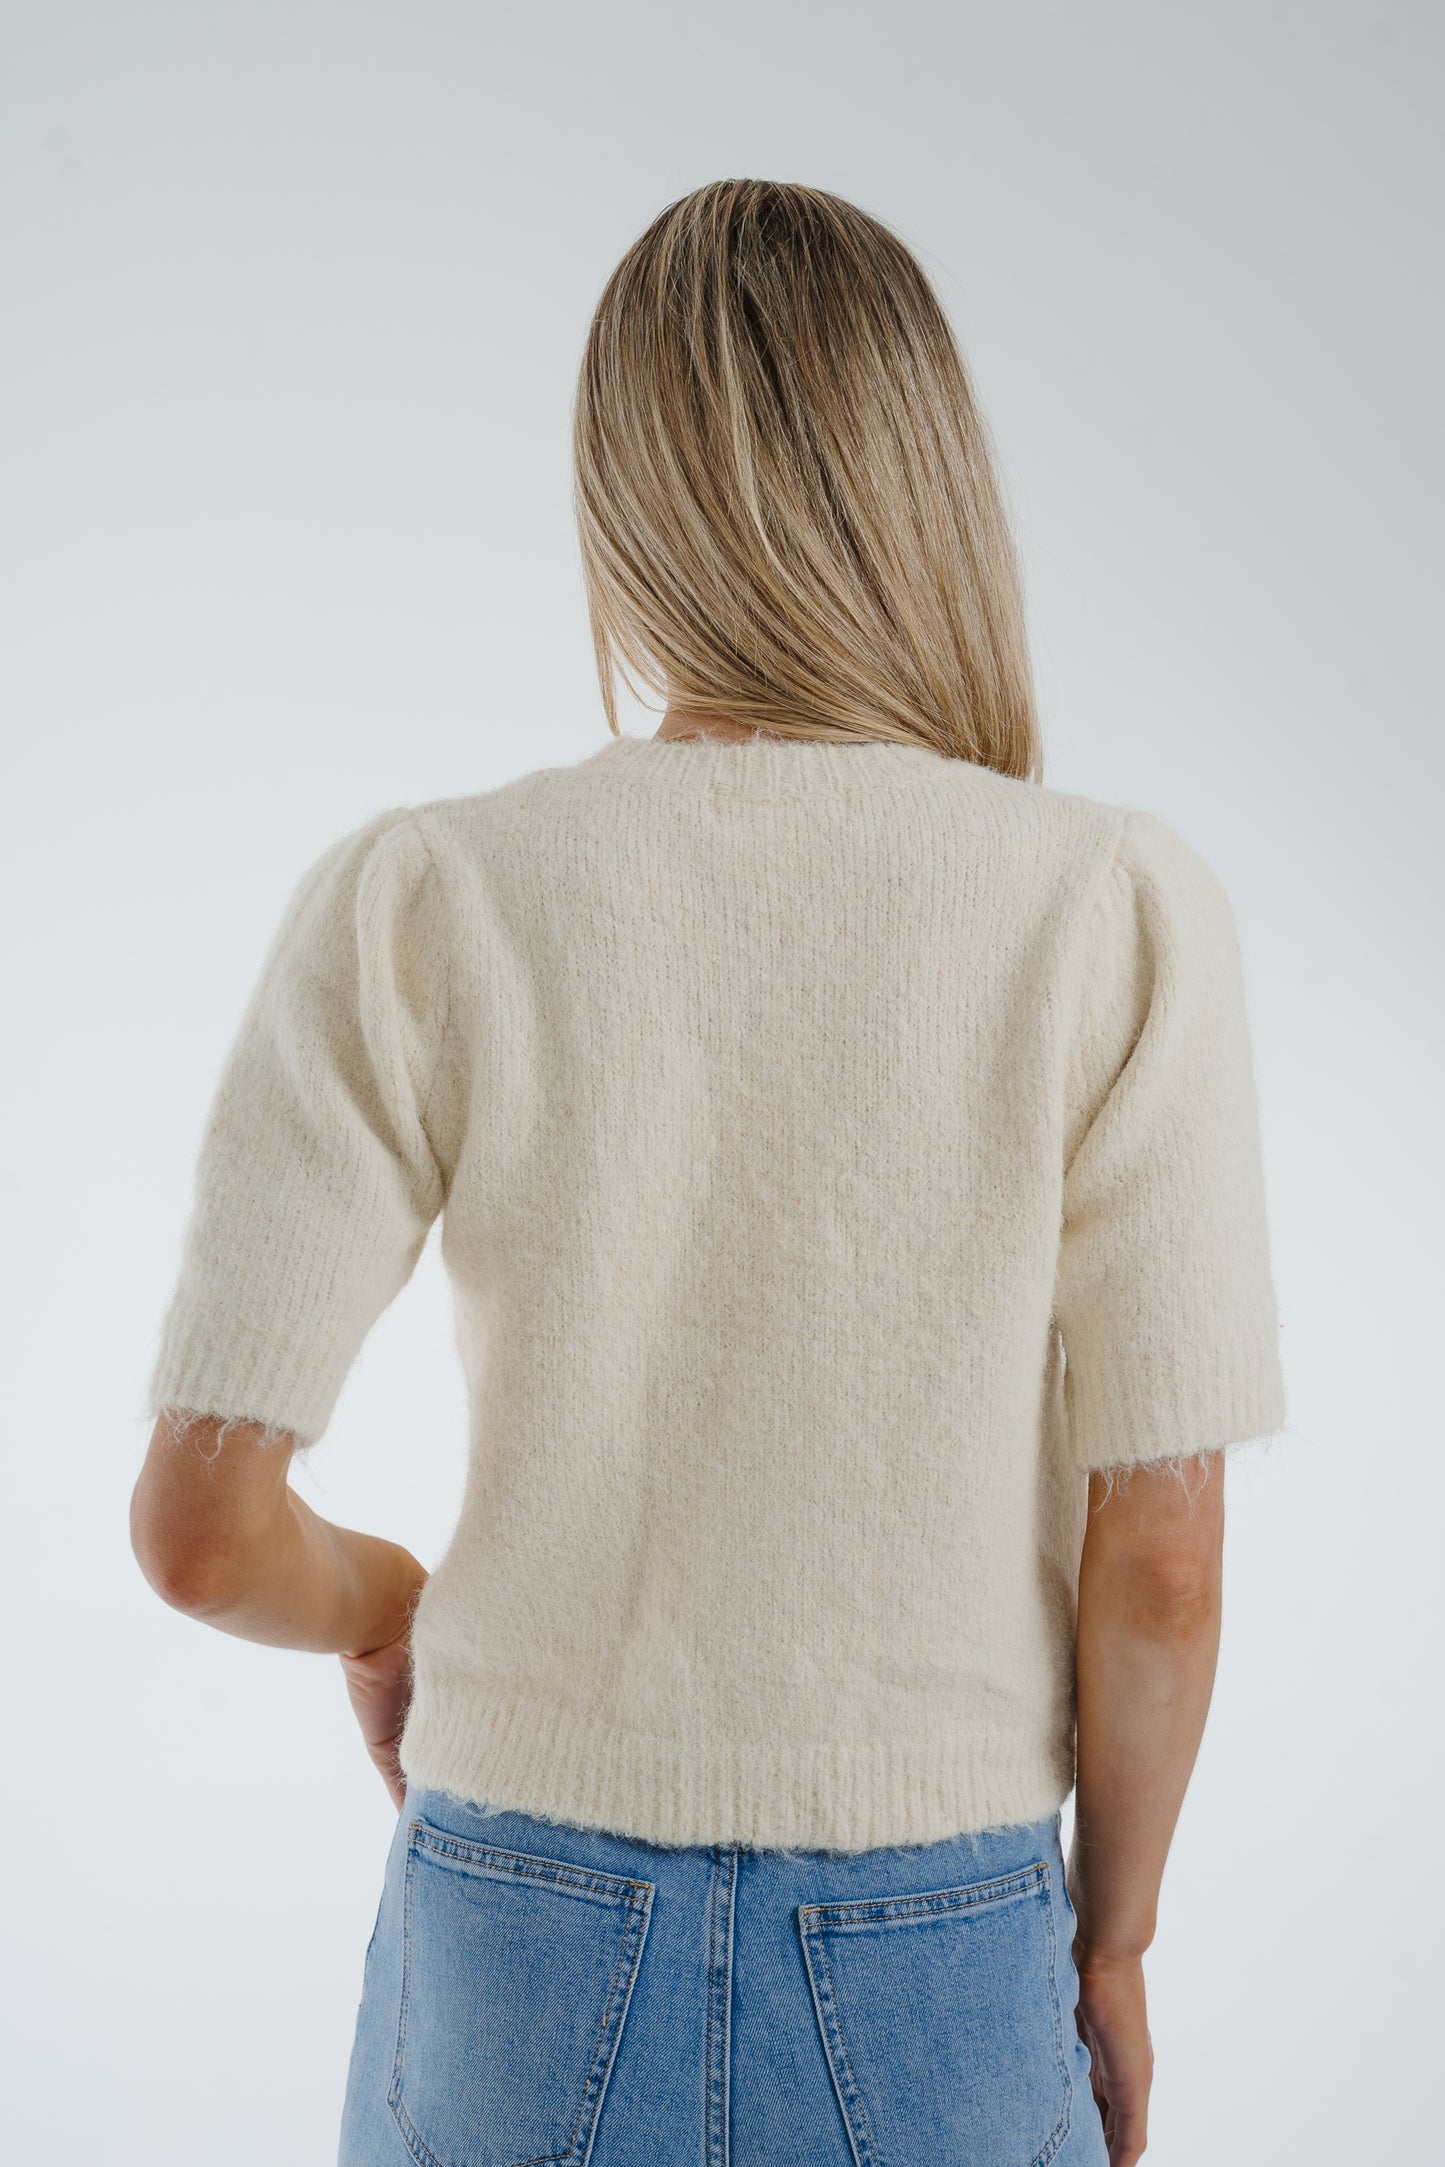 Ally Embroidered Floral Jumper In Cream